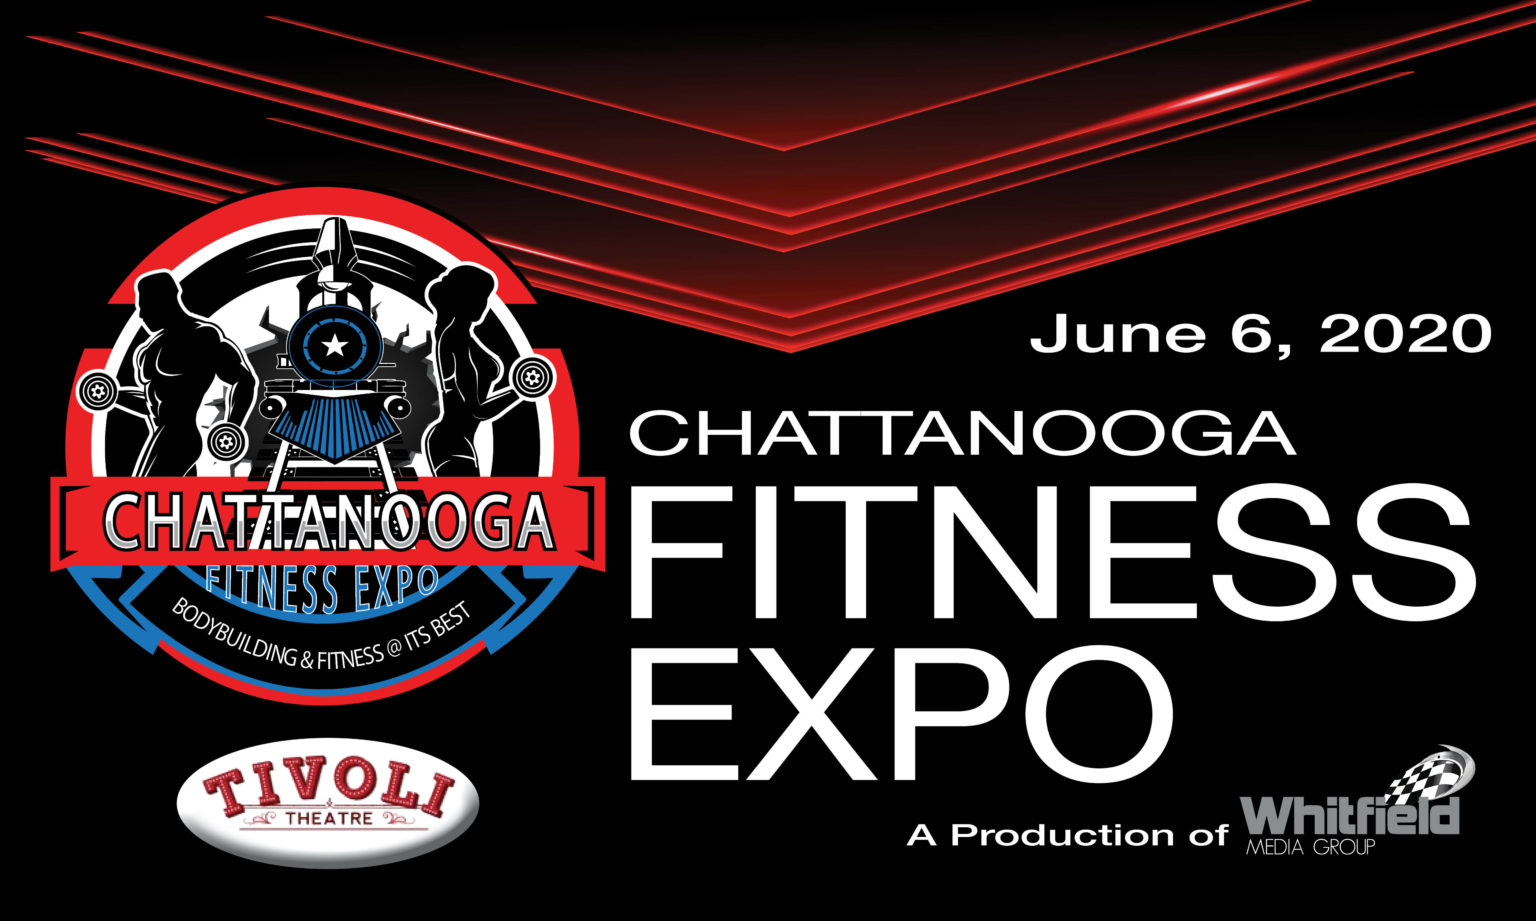 Chattanooga Fitness Expo Coming Soon June 6, 2020 Whitfield Media Group